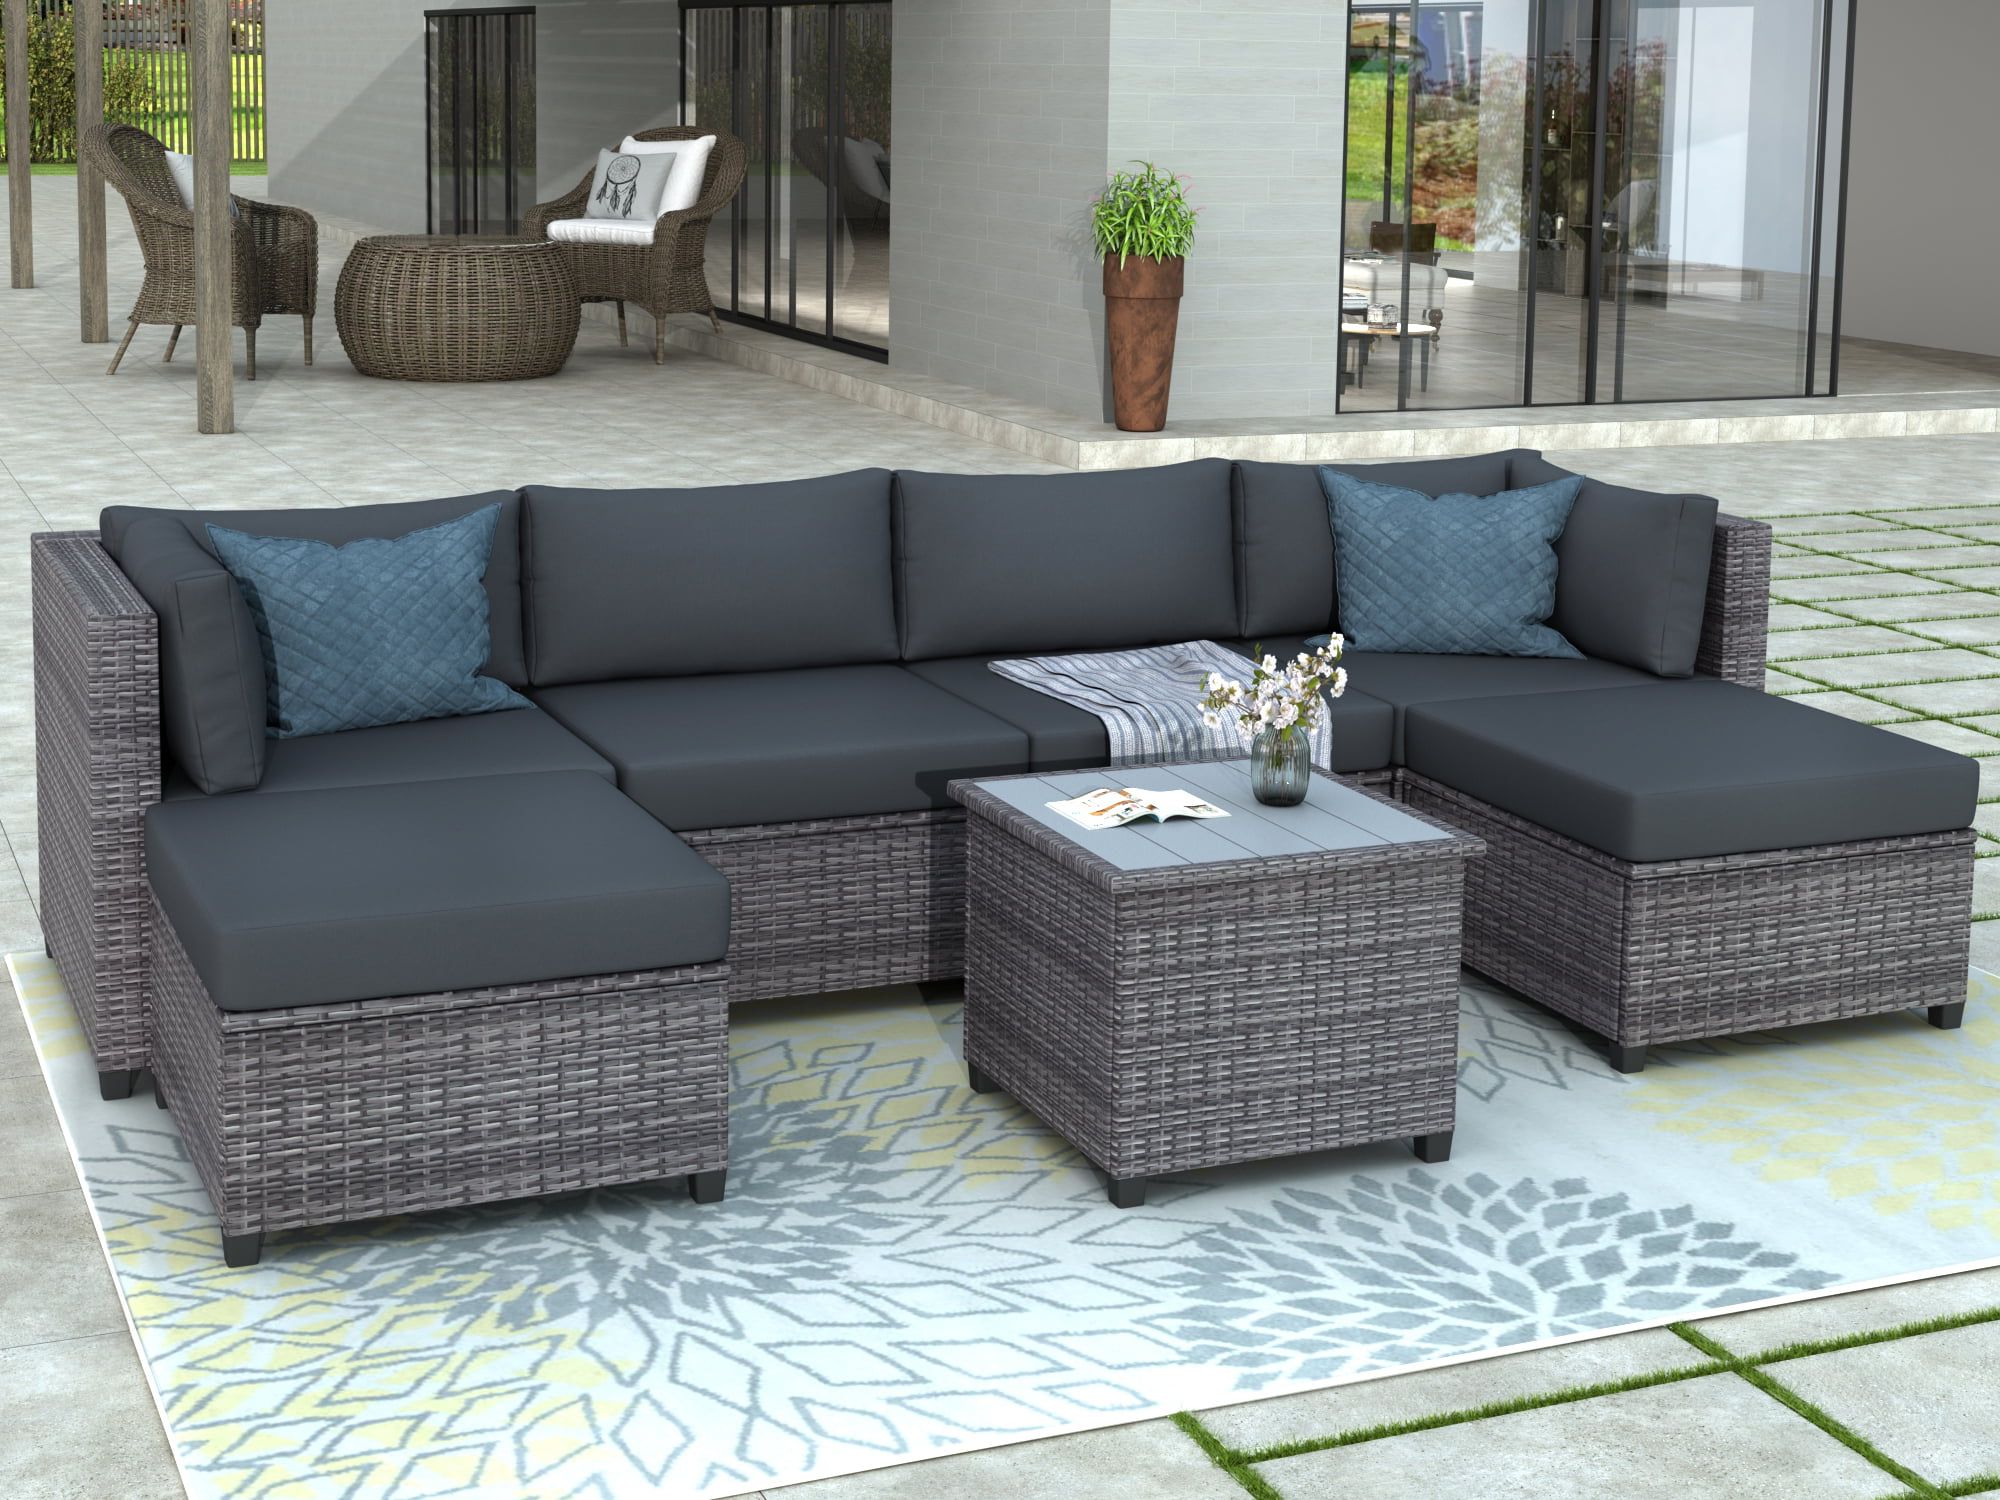 Outdoor Rattan Sectional Sofas With Coffee Table Throughout Most Popular 7 Piece Patio Sectional Sofa Set With 4 Rattan Wicker Chairs, 2 Ottoman, Coffee  Table, All Weather Outdoor Conversation Set With Gray Cushions For  Backyard, Porch, Garden, Poolside, L5018 – Walmart (View 6 of 15)